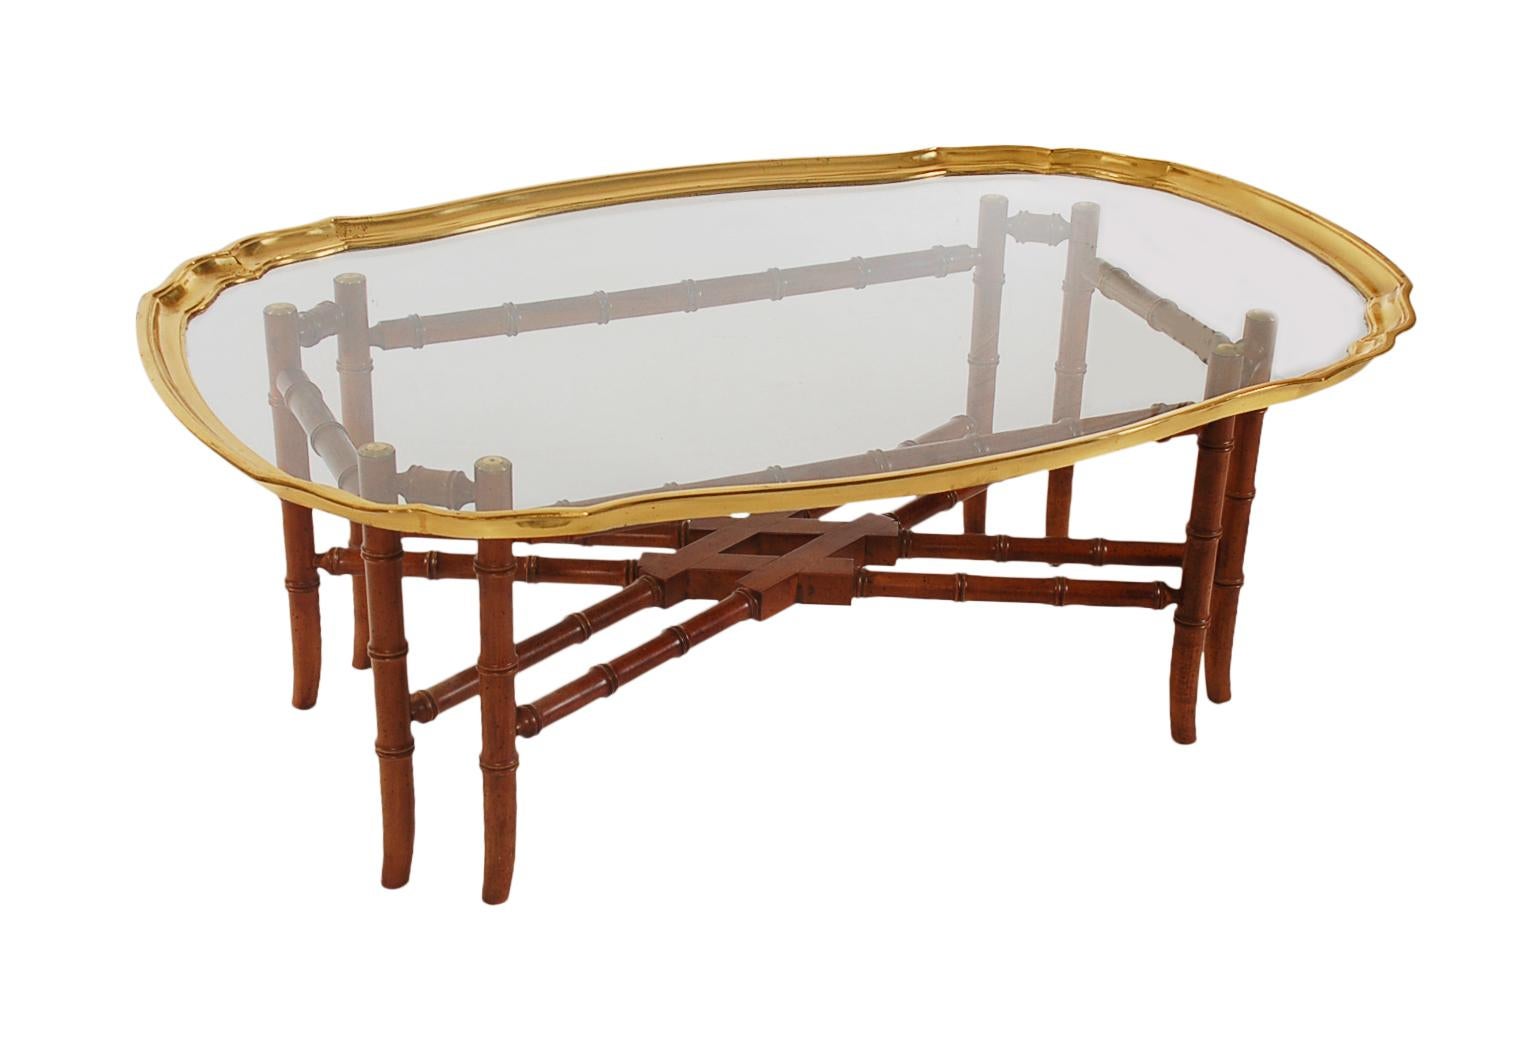 A smaller scale coffee table from the 1970s attributed to Baker Furniture. It features a solid wood bamboo form base, with a brass framed glass top. Very clean and ready for use.